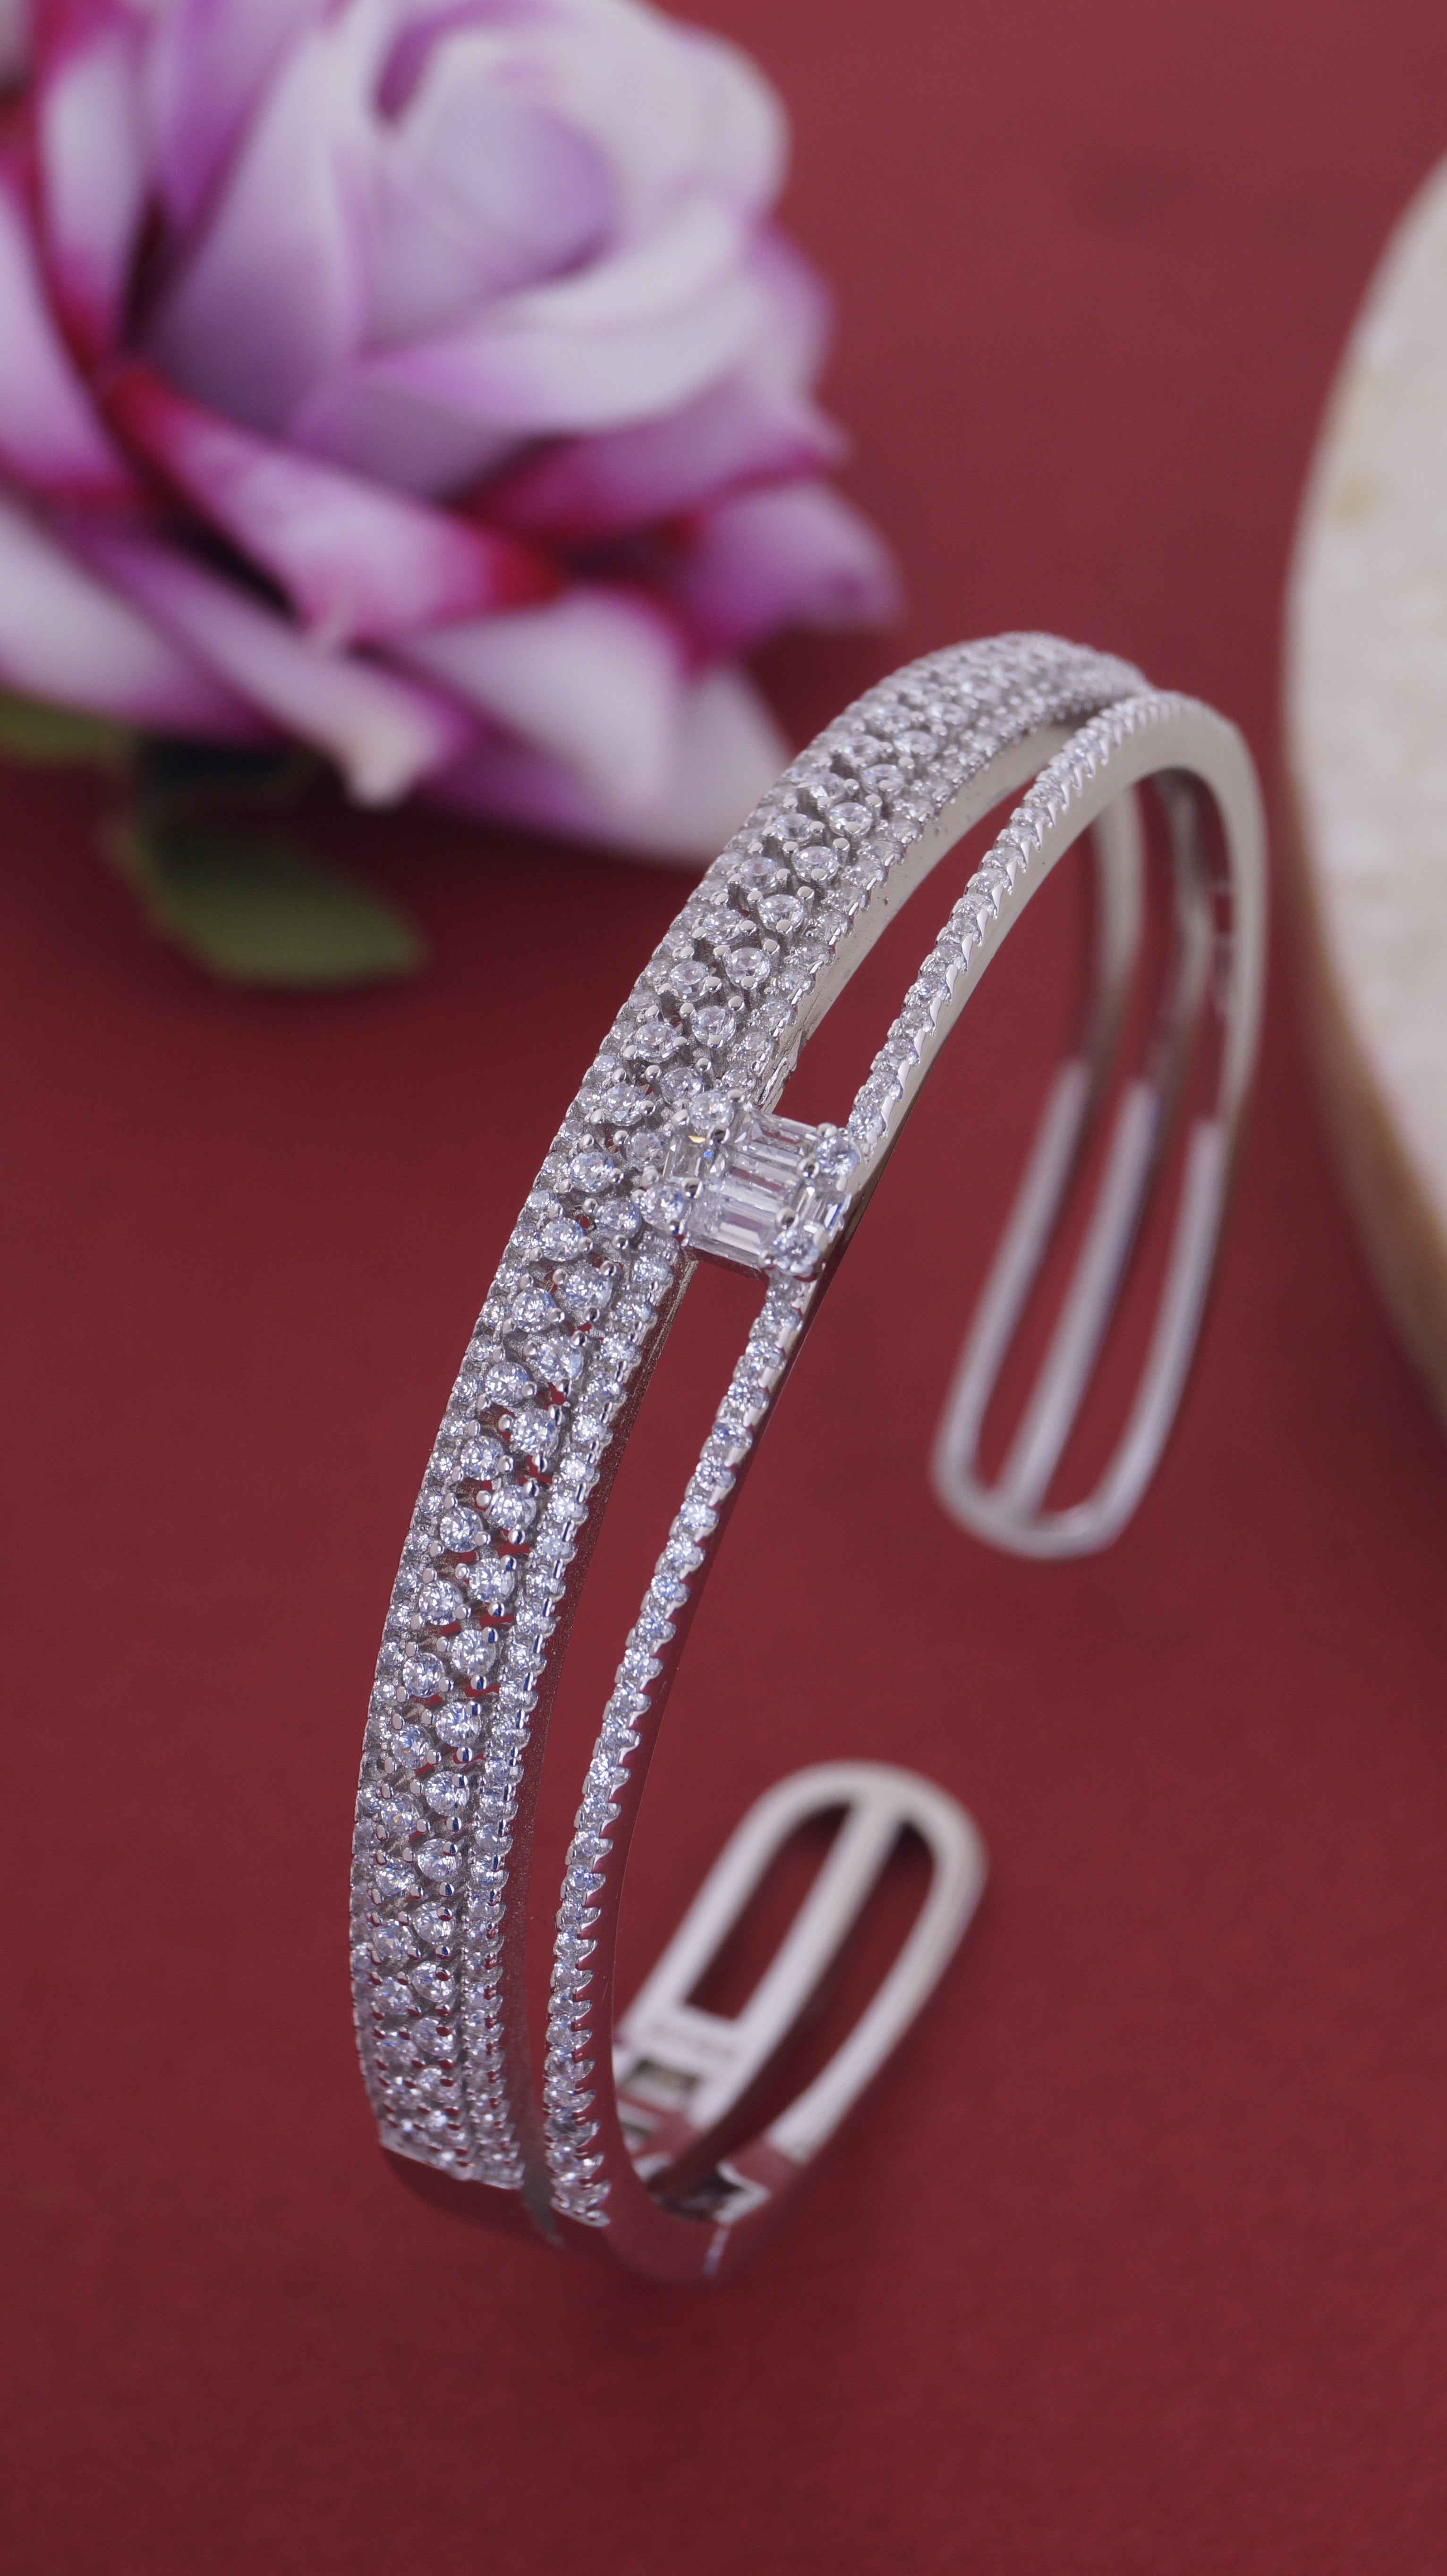 Women Bangle Gold Color Wedding Bangles For Women Bride Can OPen Bracelets  Indian/Ethiopian/France/African/Dubai Jewelry Gifts Y1218 From Yanqin08,  $14.59 | DHgate.Com